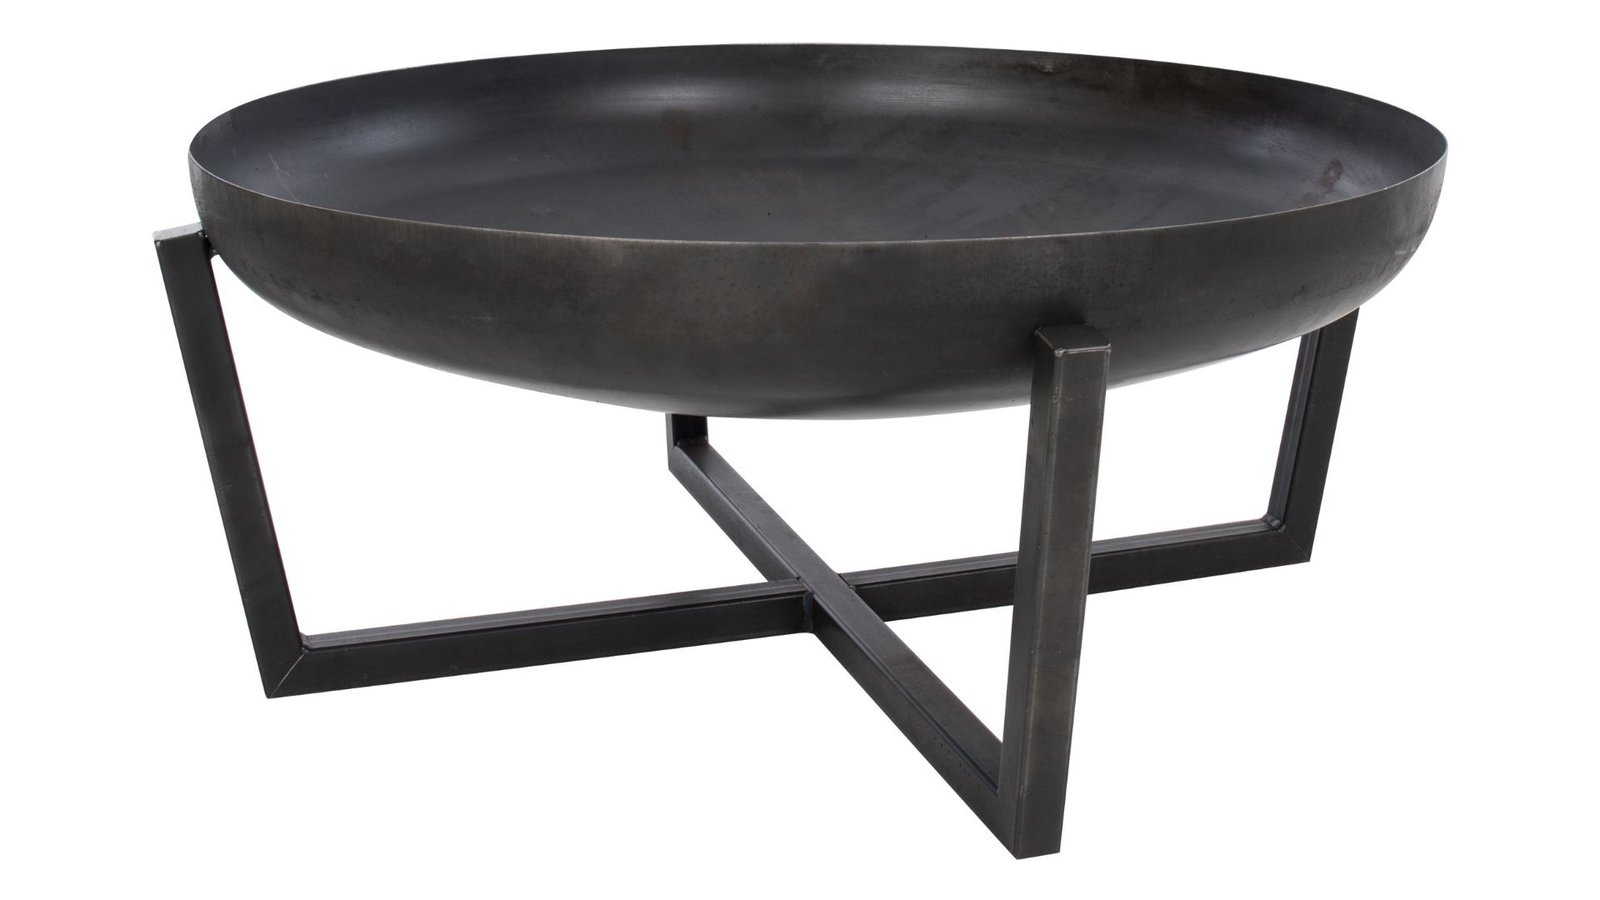 RedFire Fire Pit Tornio Industrial 80 cm